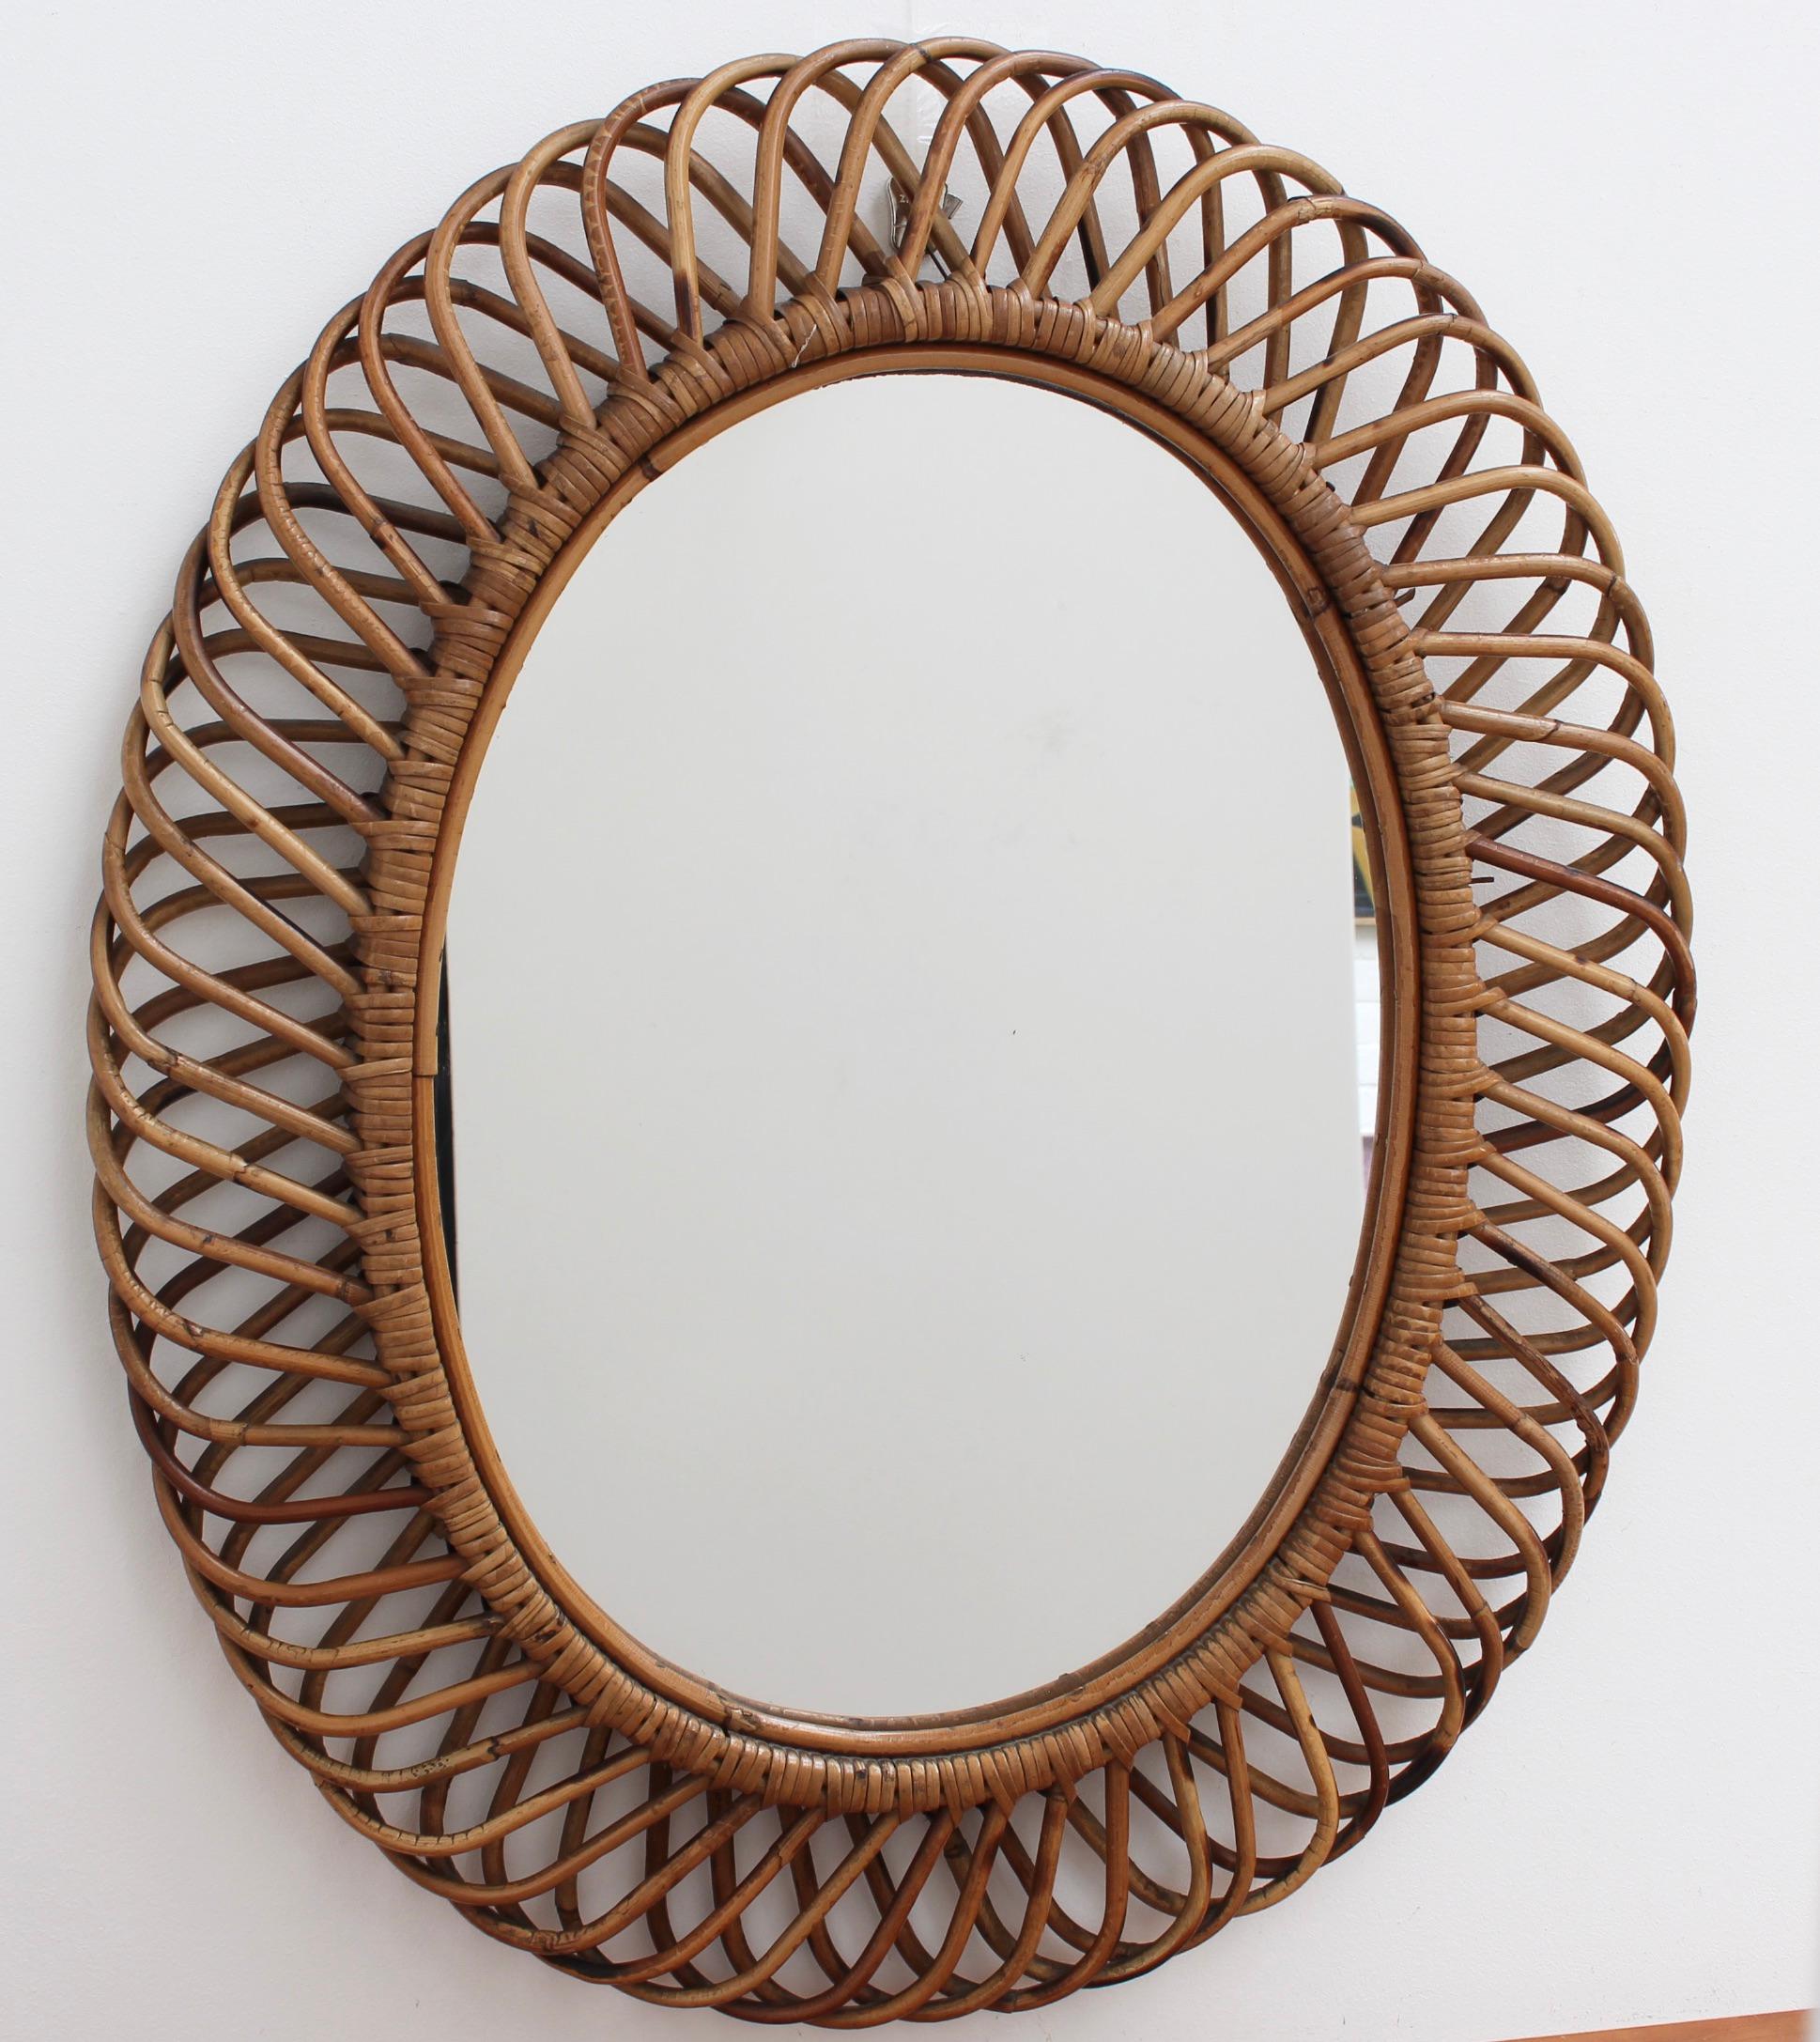 Italian rattan wall mirror (circa 1960s) in the style of Franco Albini. The mirror has a complex weave of rattan in a series of horseshoe-shaped projections on the frame edge. There is a graceful, aged patina on the mirror frame providing